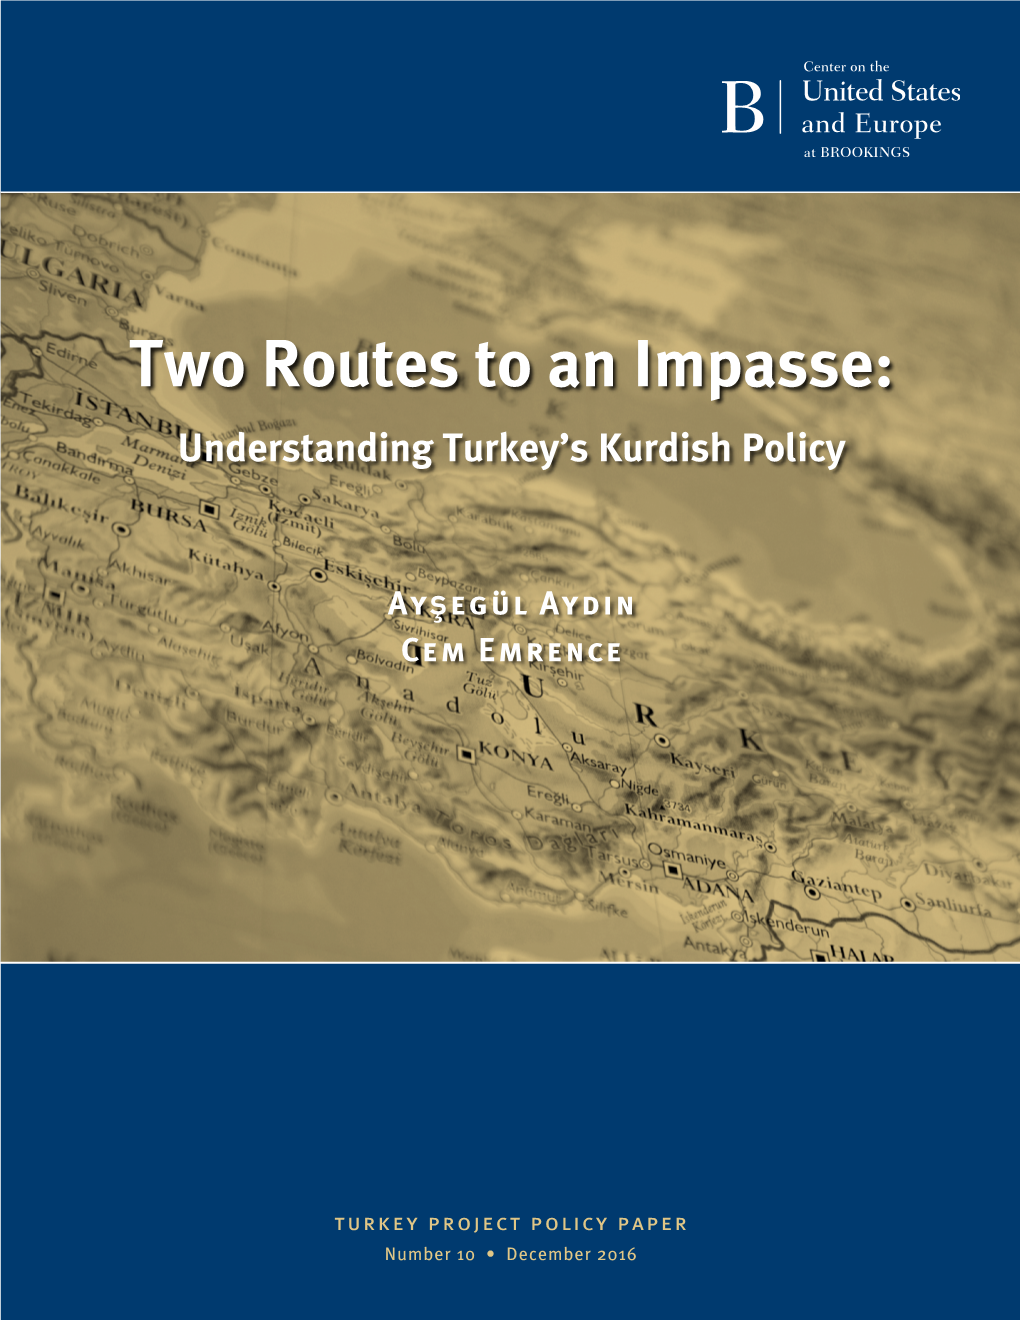 Two Routes to an Impasse: Understanding Turkey's